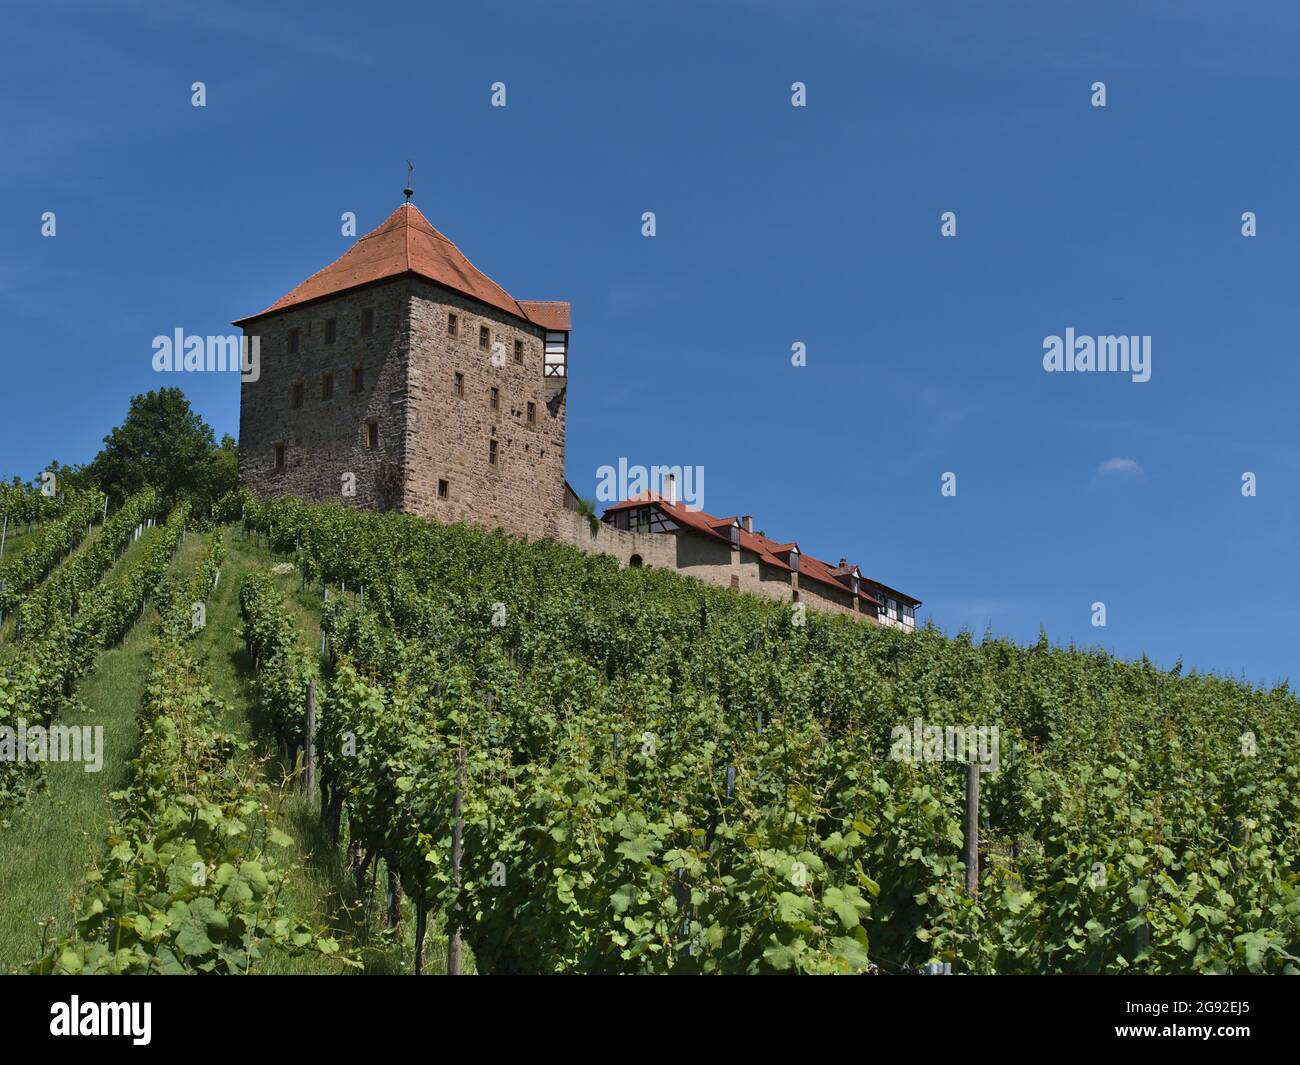 Beautiful low angle view of historic medieval castle Burg Wildeck (ca. 12th century) in Baden-Württemberg, Germany, with vineyard in front. Stock Photo